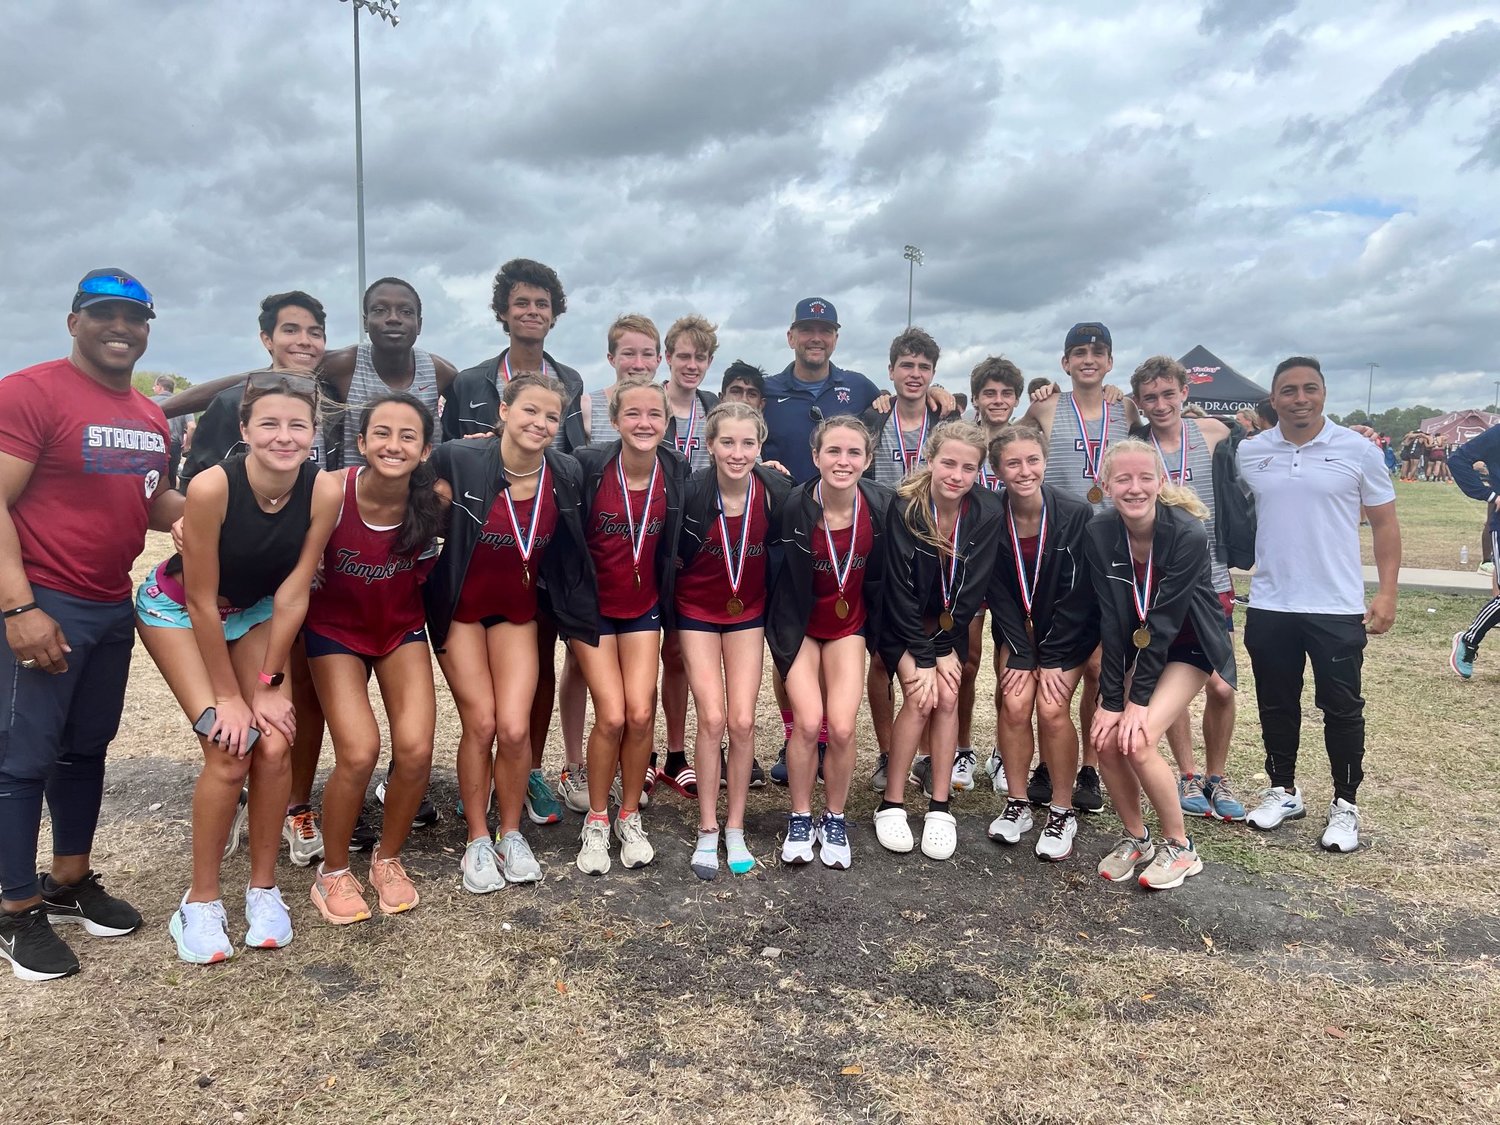 The Tompkins boys and girls teams pose together after both qualified for the state cross country meet on Monday.